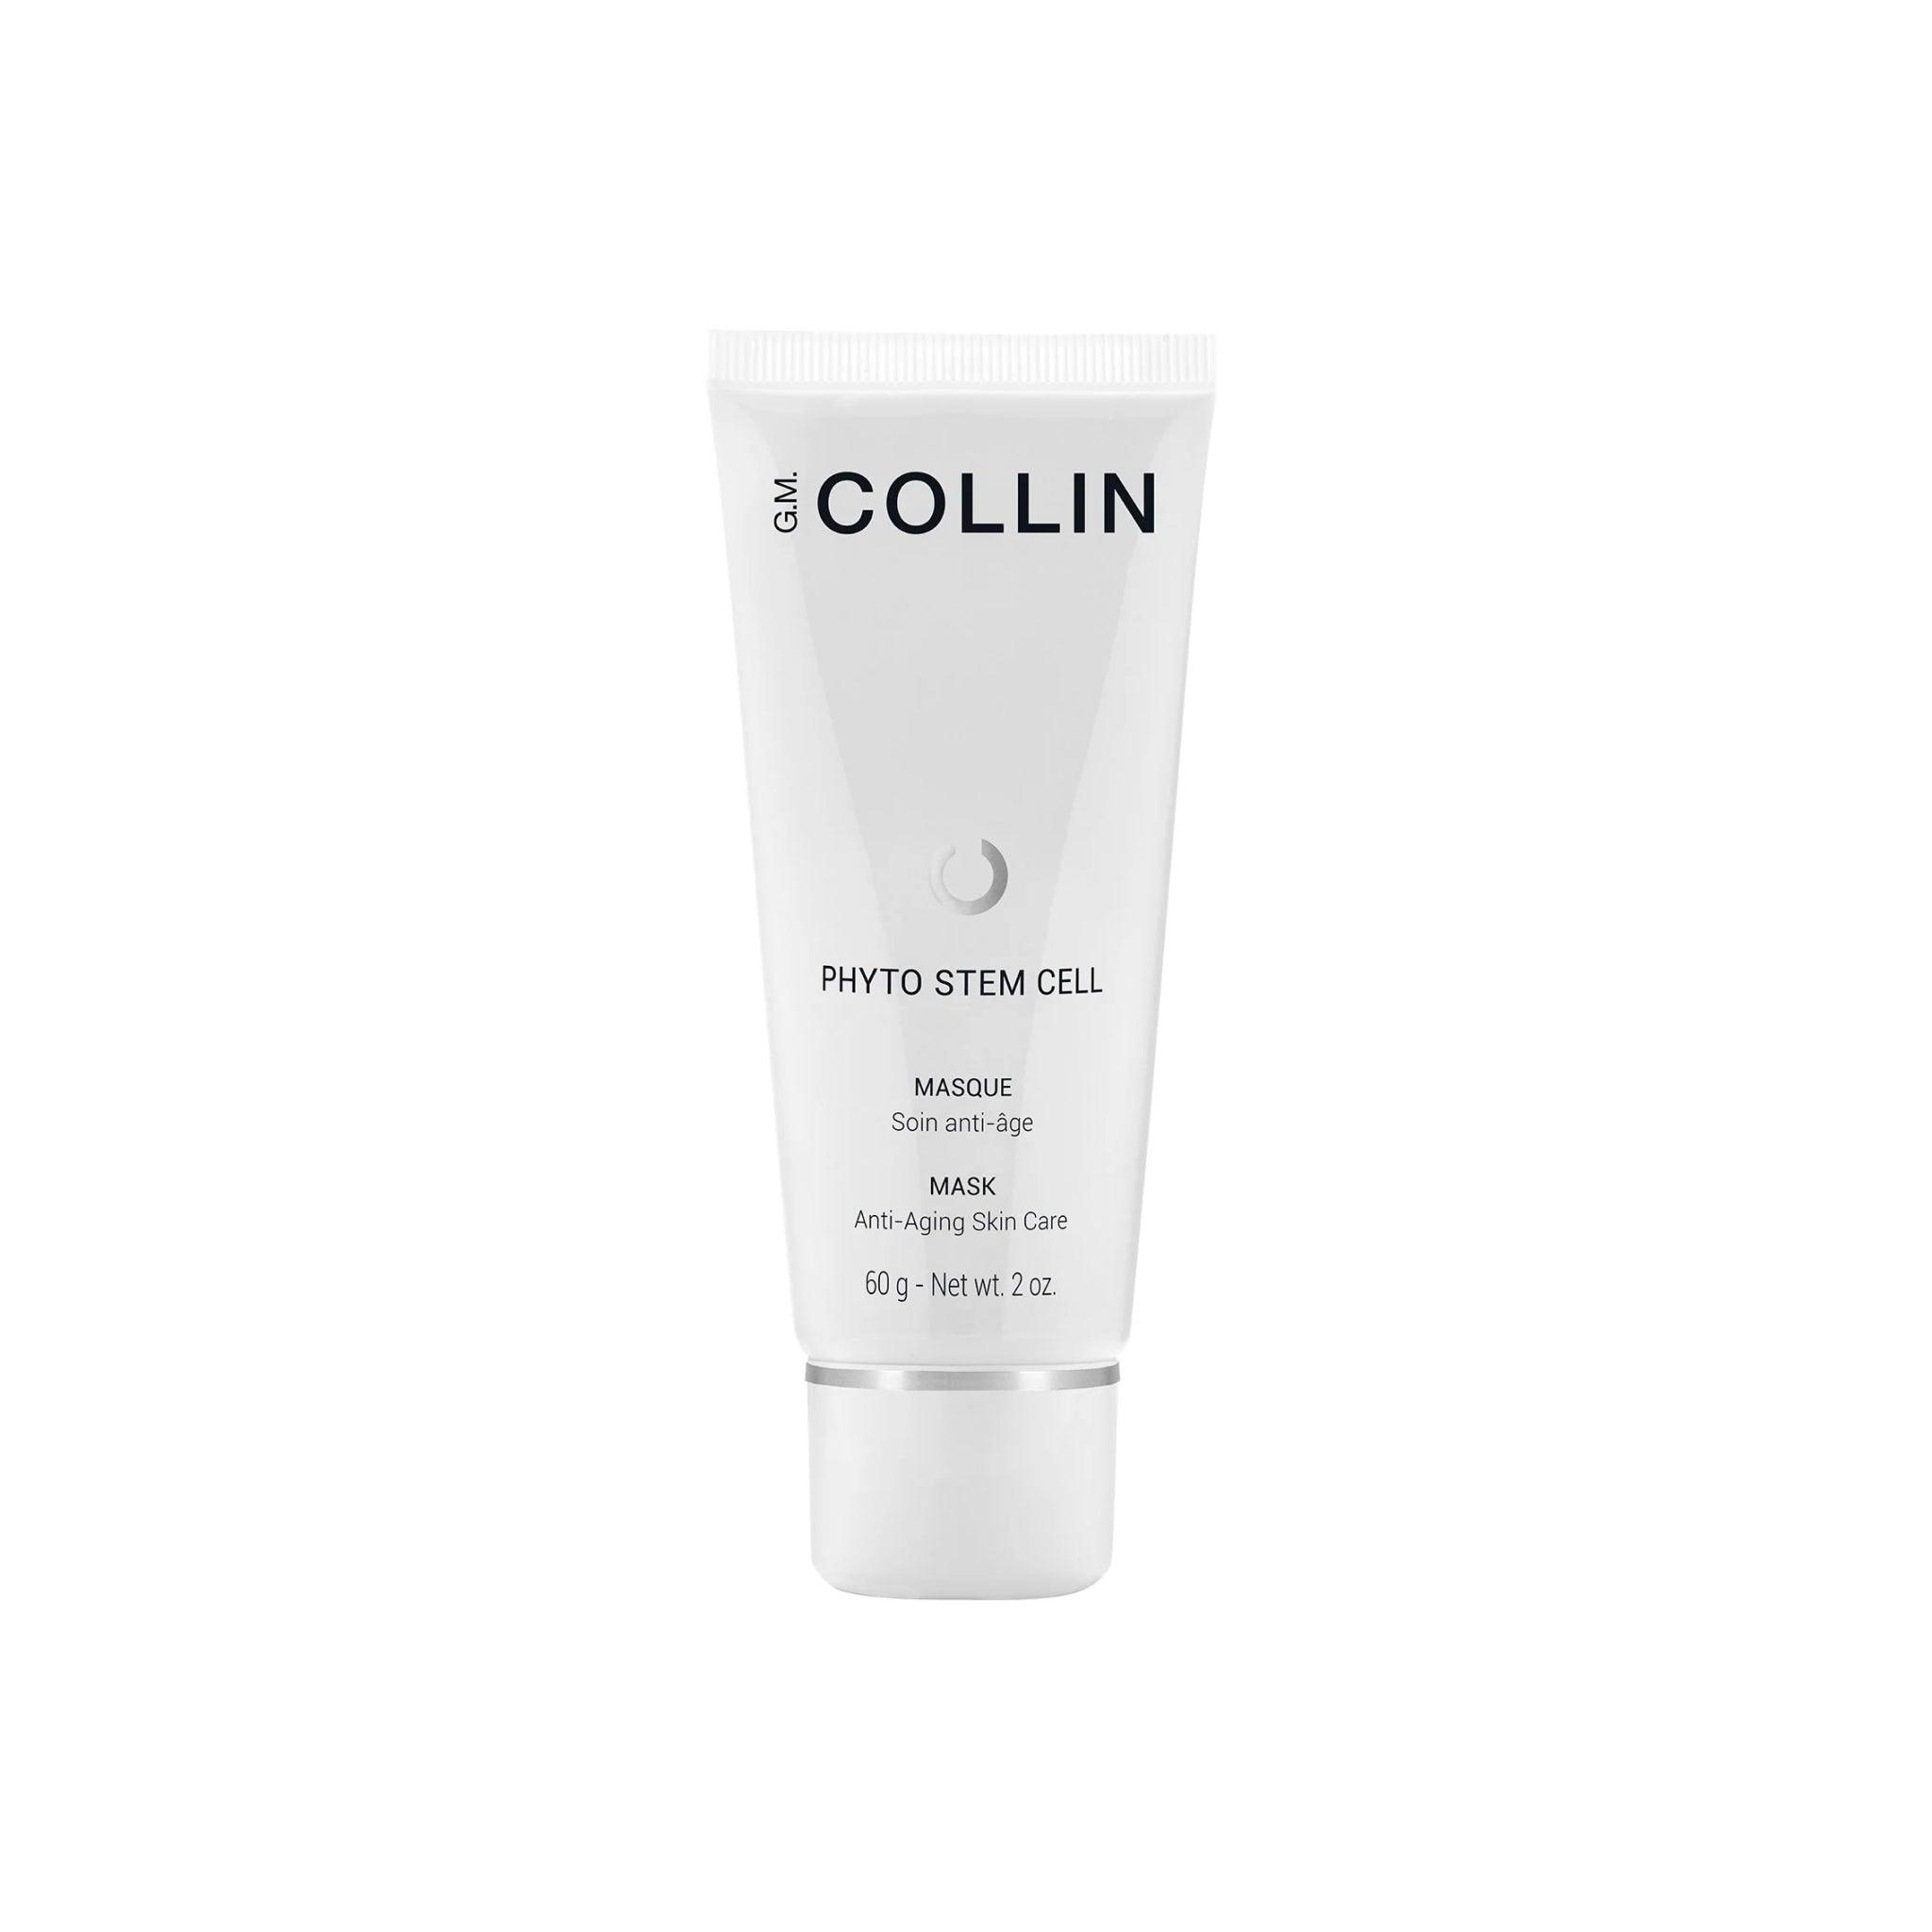 GM Collin Phyto Stem Cell Mask